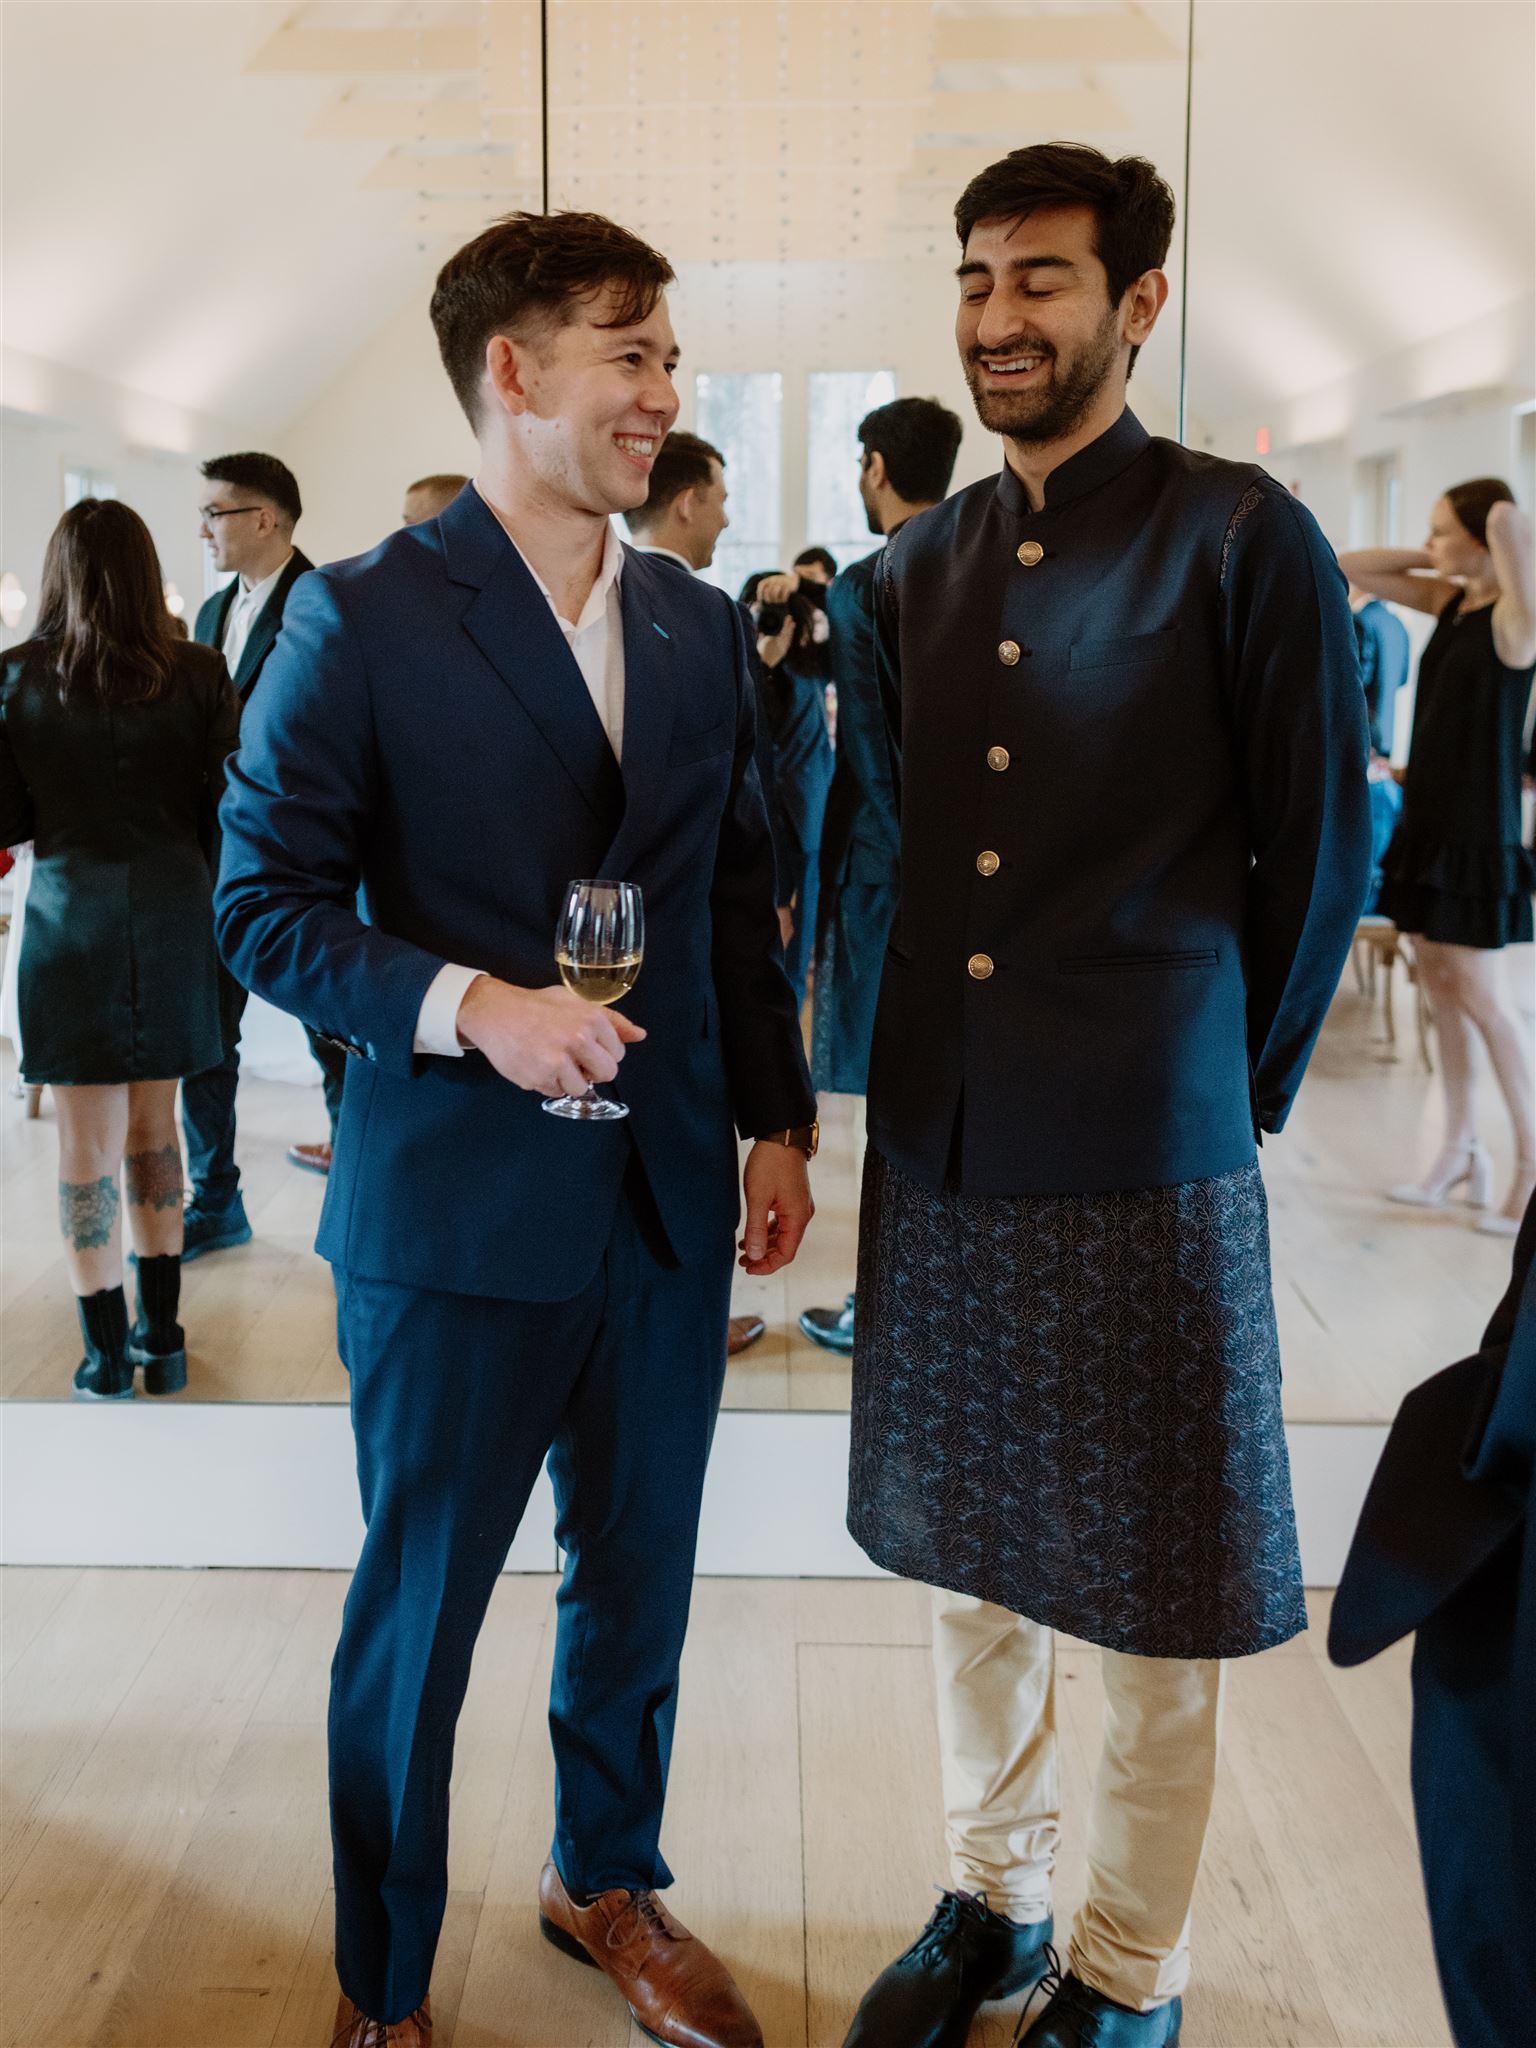 The groom-to-be is happily chatting with a guest at their welcome dinner in New York. Photojournalistic photography image by Jenny Fu Studio